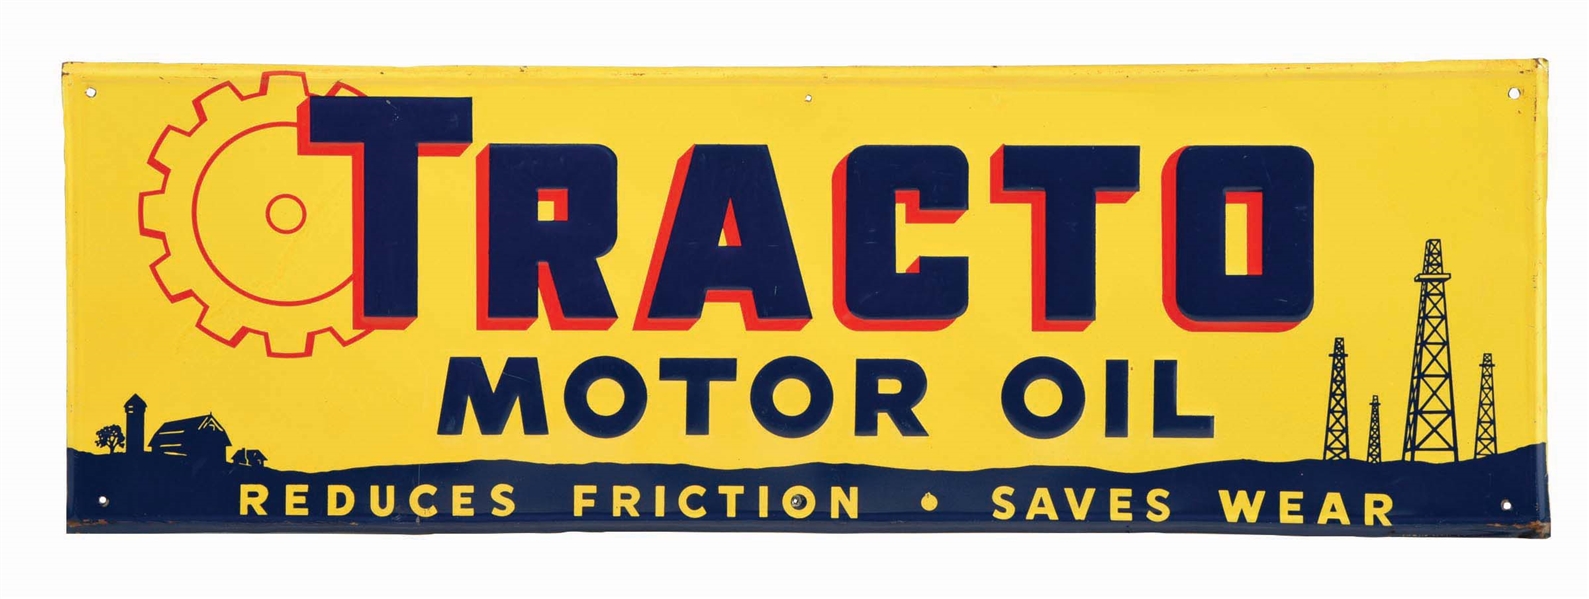 TRACTO MOTOR OIL TIN SIGN.